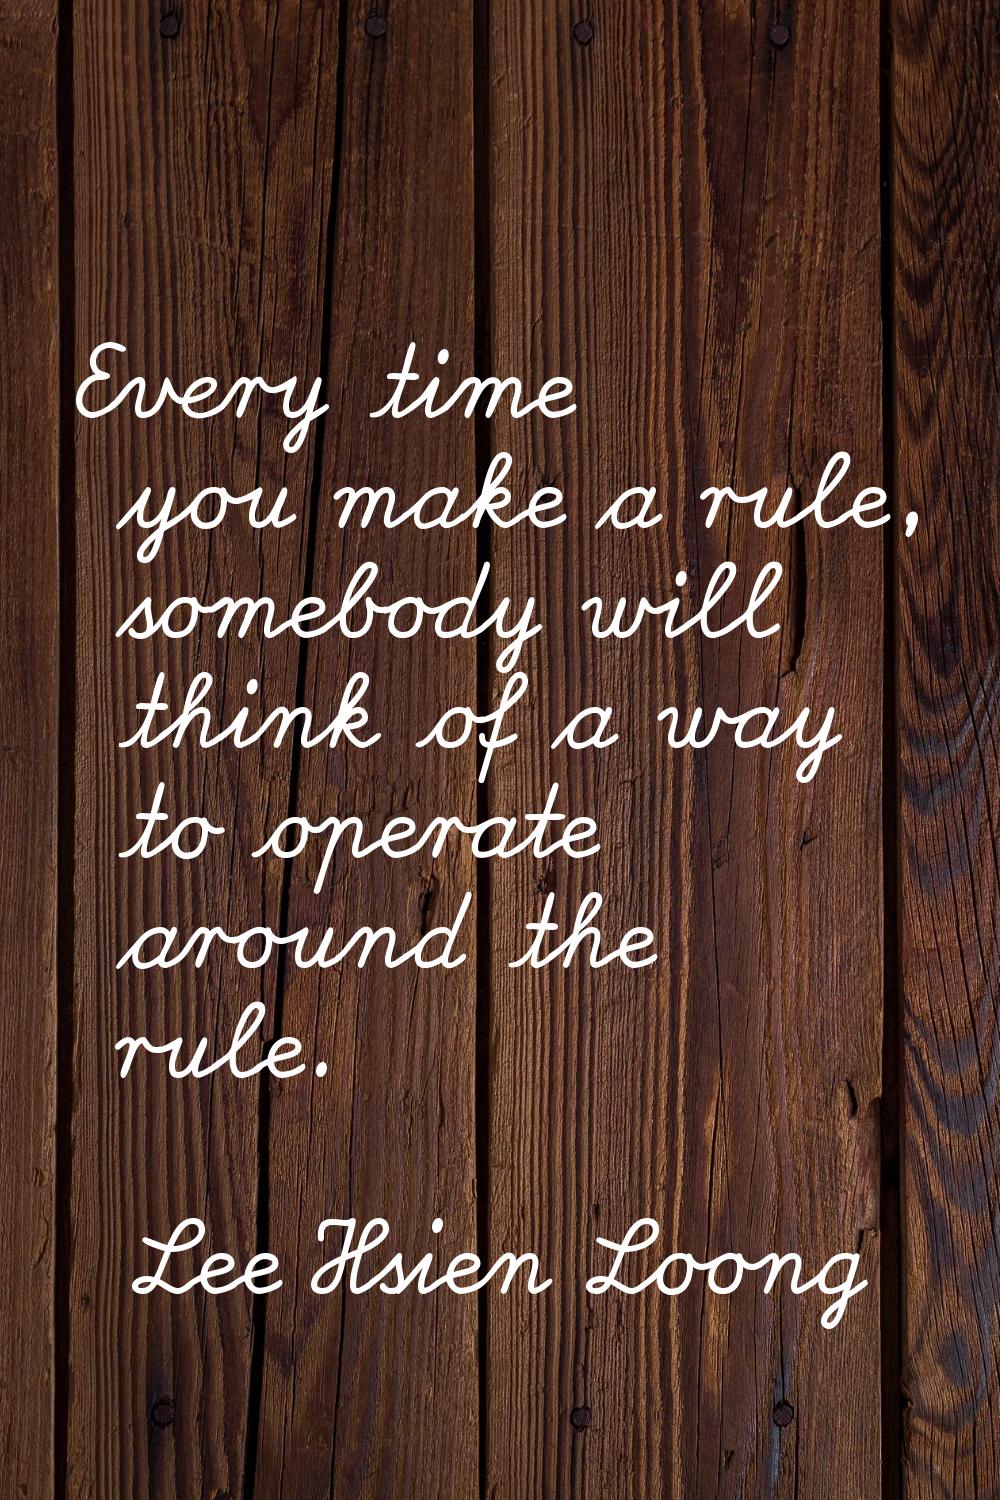 Every time you make a rule, somebody will think of a way to operate around the rule.